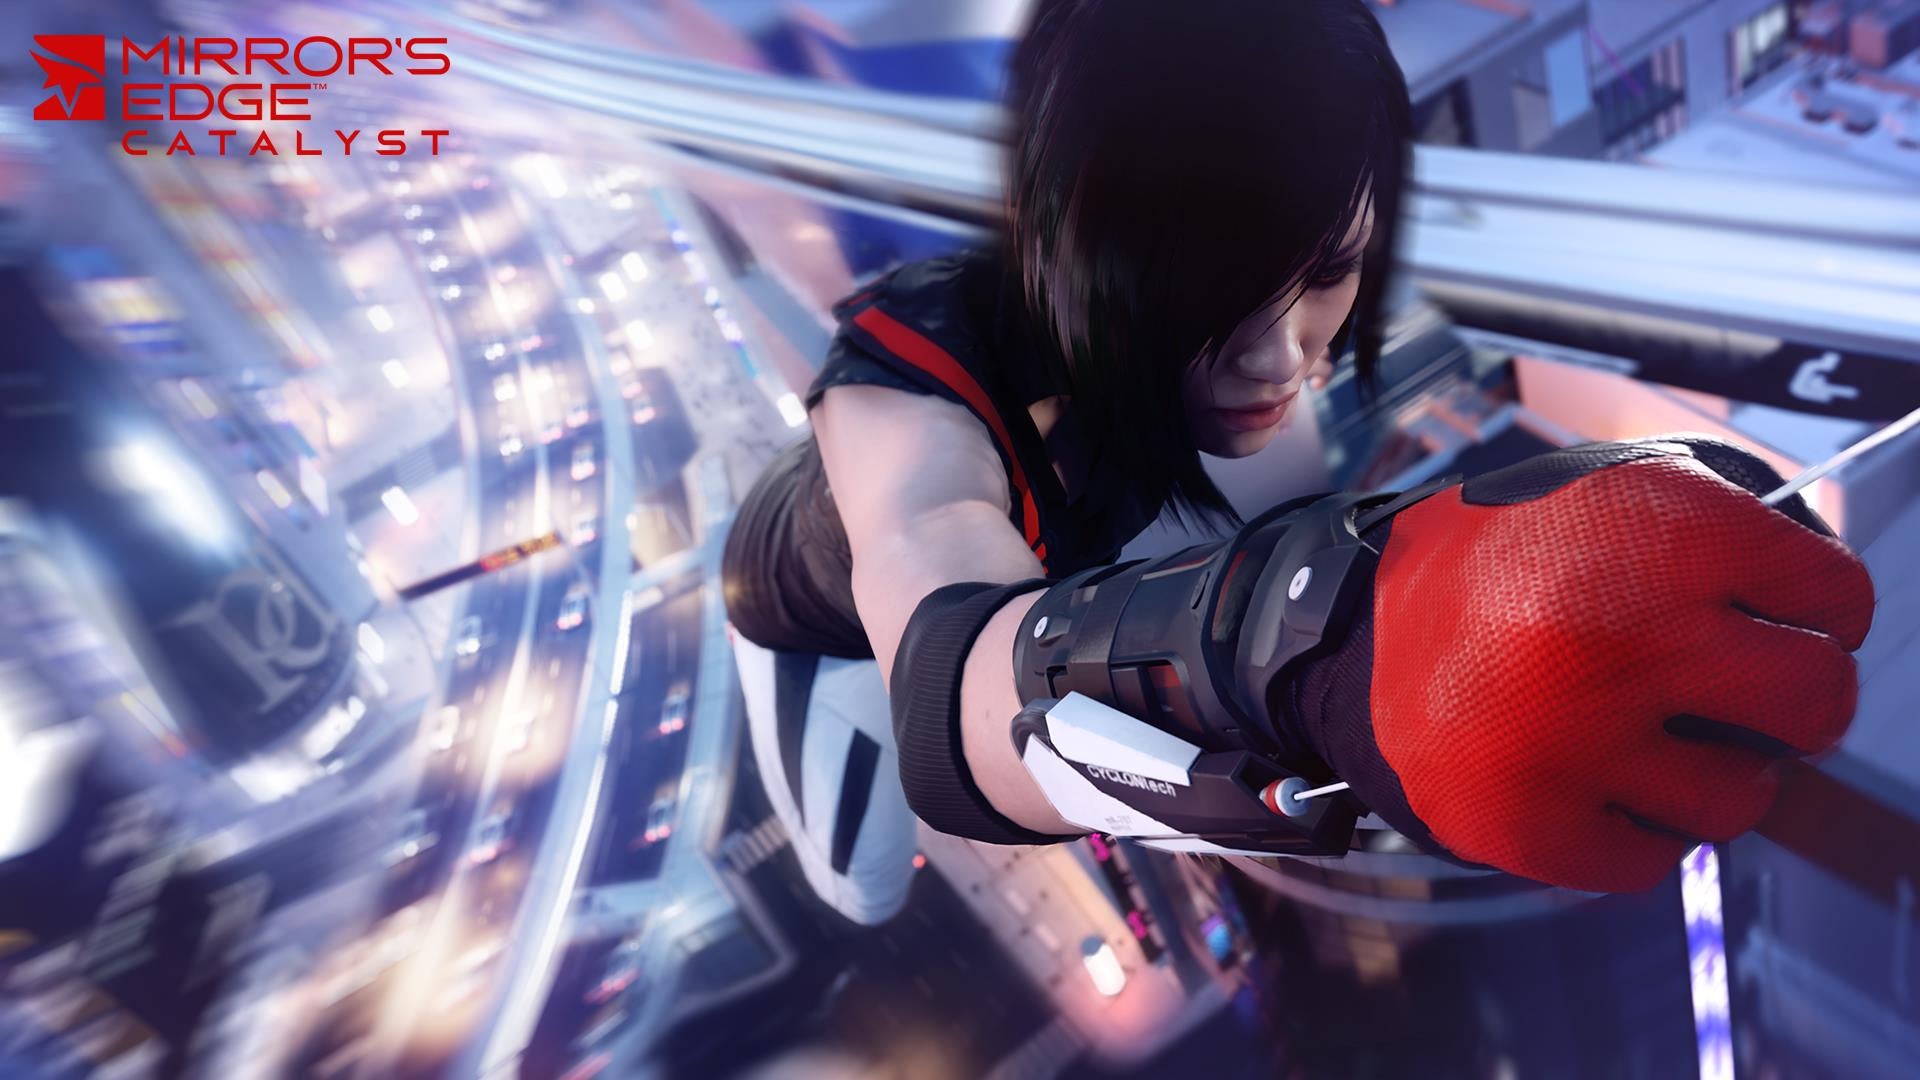 Image for Gamescom 2015: first Mirror's Edge Catalyst gameplay trailer released